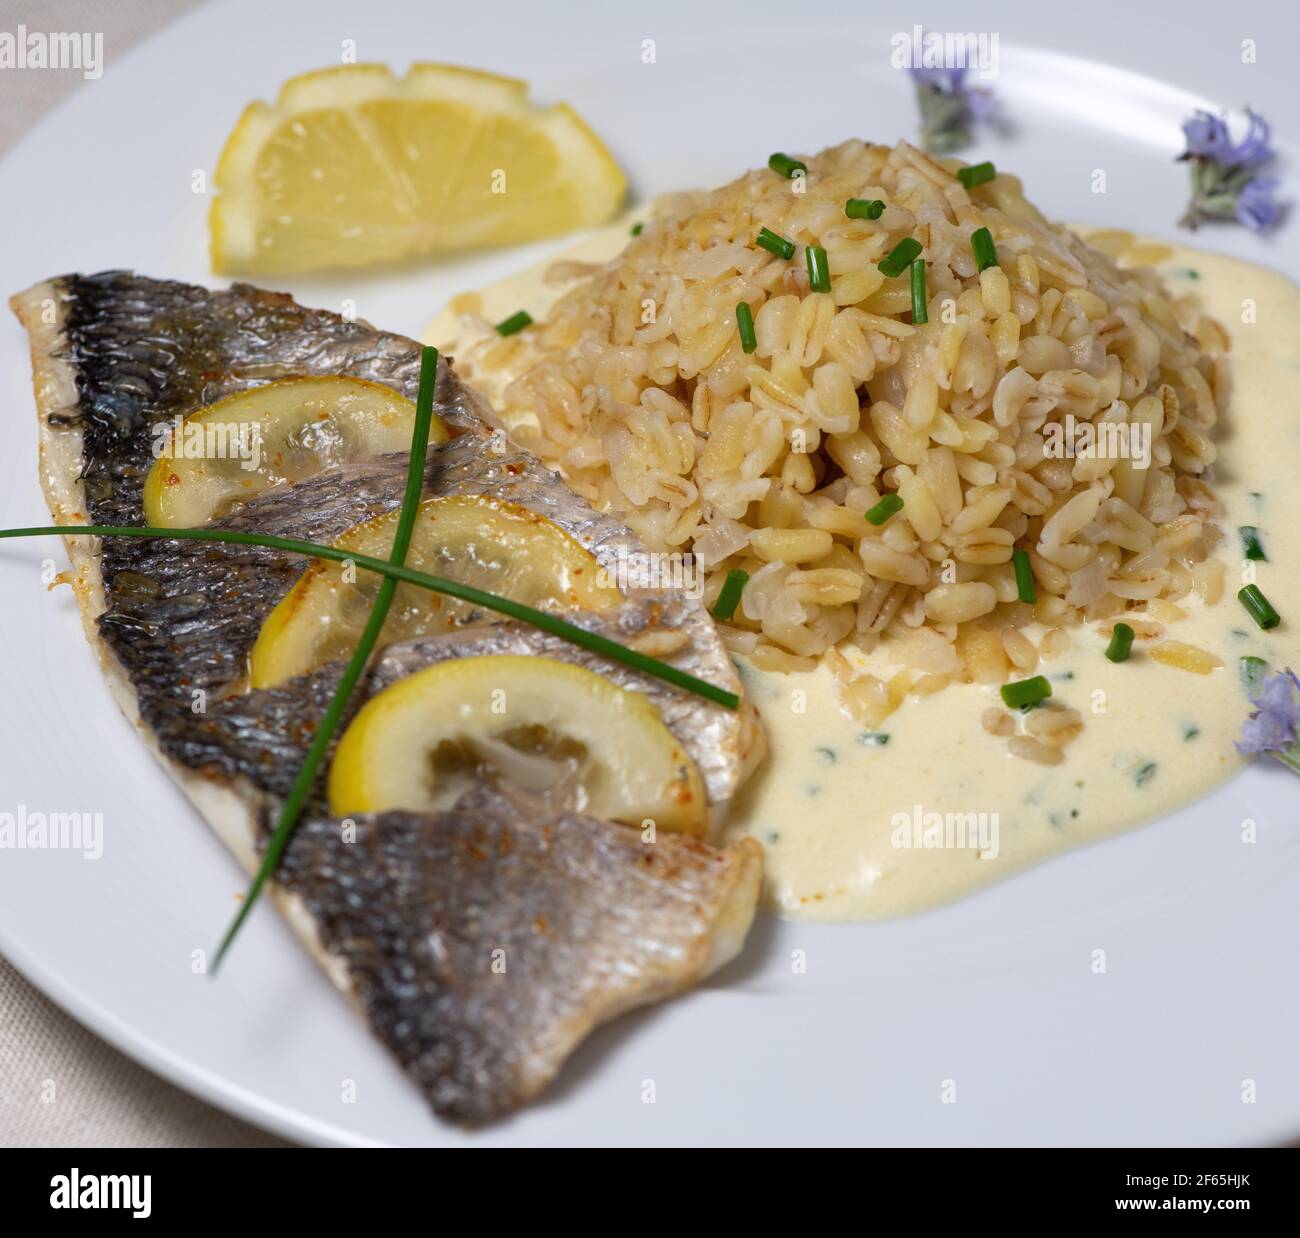 Lemon spiked sea bream fillet, cooked wheat risotto  Stock Photo